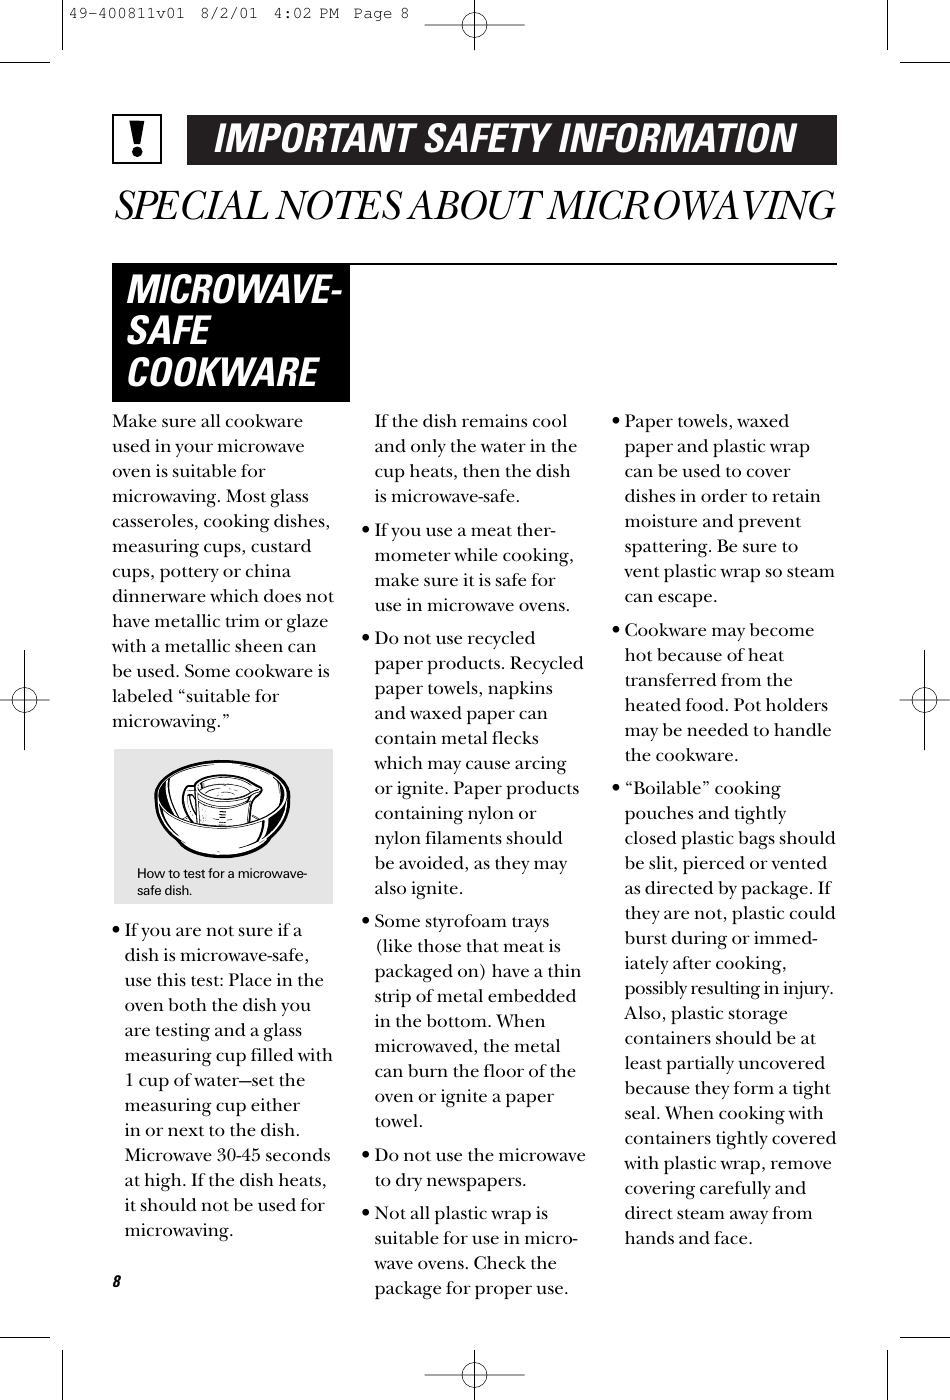 IMPORTANT SAFETY INFORMATIONSPECIAL NOTES ABOUT MICROWAVINGMake sure all cookwareused in your microwaveoven is suitable formicrowaving. Most glasscasseroles, cooking dishes,measuring cups, custardcups, pottery or chinadinnerware which does nothave metallic trim or glazewith a metallic sheen canbe used. Some cookware islabeled “suitable formicrowaving.”•If you are not sure if adish is microwave-safe,use this test: Place in theoven both the dish youare testing and a glassmeasuring cup filled with1 cup of water—set themeasuring cup either in or next to the dish.Microwave 30-45 secondsat high. If the dish heats,it should not be used formicrowaving. If the dish remains cooland only the water in thecup heats, then the dishis microwave-safe.•If you use a meat ther-mometer while cooking,make sure it is safe foruse in microwave ovens.•Do not use recycledpaper products. Recycledpaper towels, napkinsand waxed paper cancontain metal fleckswhich may cause arcingor ignite. Paper productscontaining nylon ornylon filaments shouldbe avoided, as they mayalso ignite. •Some styrofoam trays(like those that meat ispackaged on) have a thinstrip of metal embeddedin the bottom. Whenmicrowaved, the metalcan burn the floor of theoven or ignite a papertowel.•Do not use the microwaveto dry newspapers.•Not all plastic wrap issuitable for use in micro-wave ovens. Check thepackage for proper use.•Paper towels, waxedpaper and plastic wrapcan be used to coverdishes in order to retainmoisture and preventspattering. Be sure tovent plastic wrap so steamcan escape.•Cookware may becomehot because of heattransferred from theheated food. Pot holdersmay be needed to handlethe cookware.•“Boilable” cookingpouches and tightlyclosed plastic bags shouldbe slit, pierced or ventedas directed by package. Ifthey are not, plastic couldburst during or immed-iately after cooking,possibly resulting in injury.Also, plastic storagecontainers should be atleast partially uncoveredbecause they form a tightseal. When cooking withcontainers tightly coveredwith plastic wrap, removecovering carefully anddirect steam away fromhands and face.MICROWAVE-SAFECOOKWAREHow to test for a microwave-safe dish.849-400811v01  8/2/01  4:02 PM  Page 8